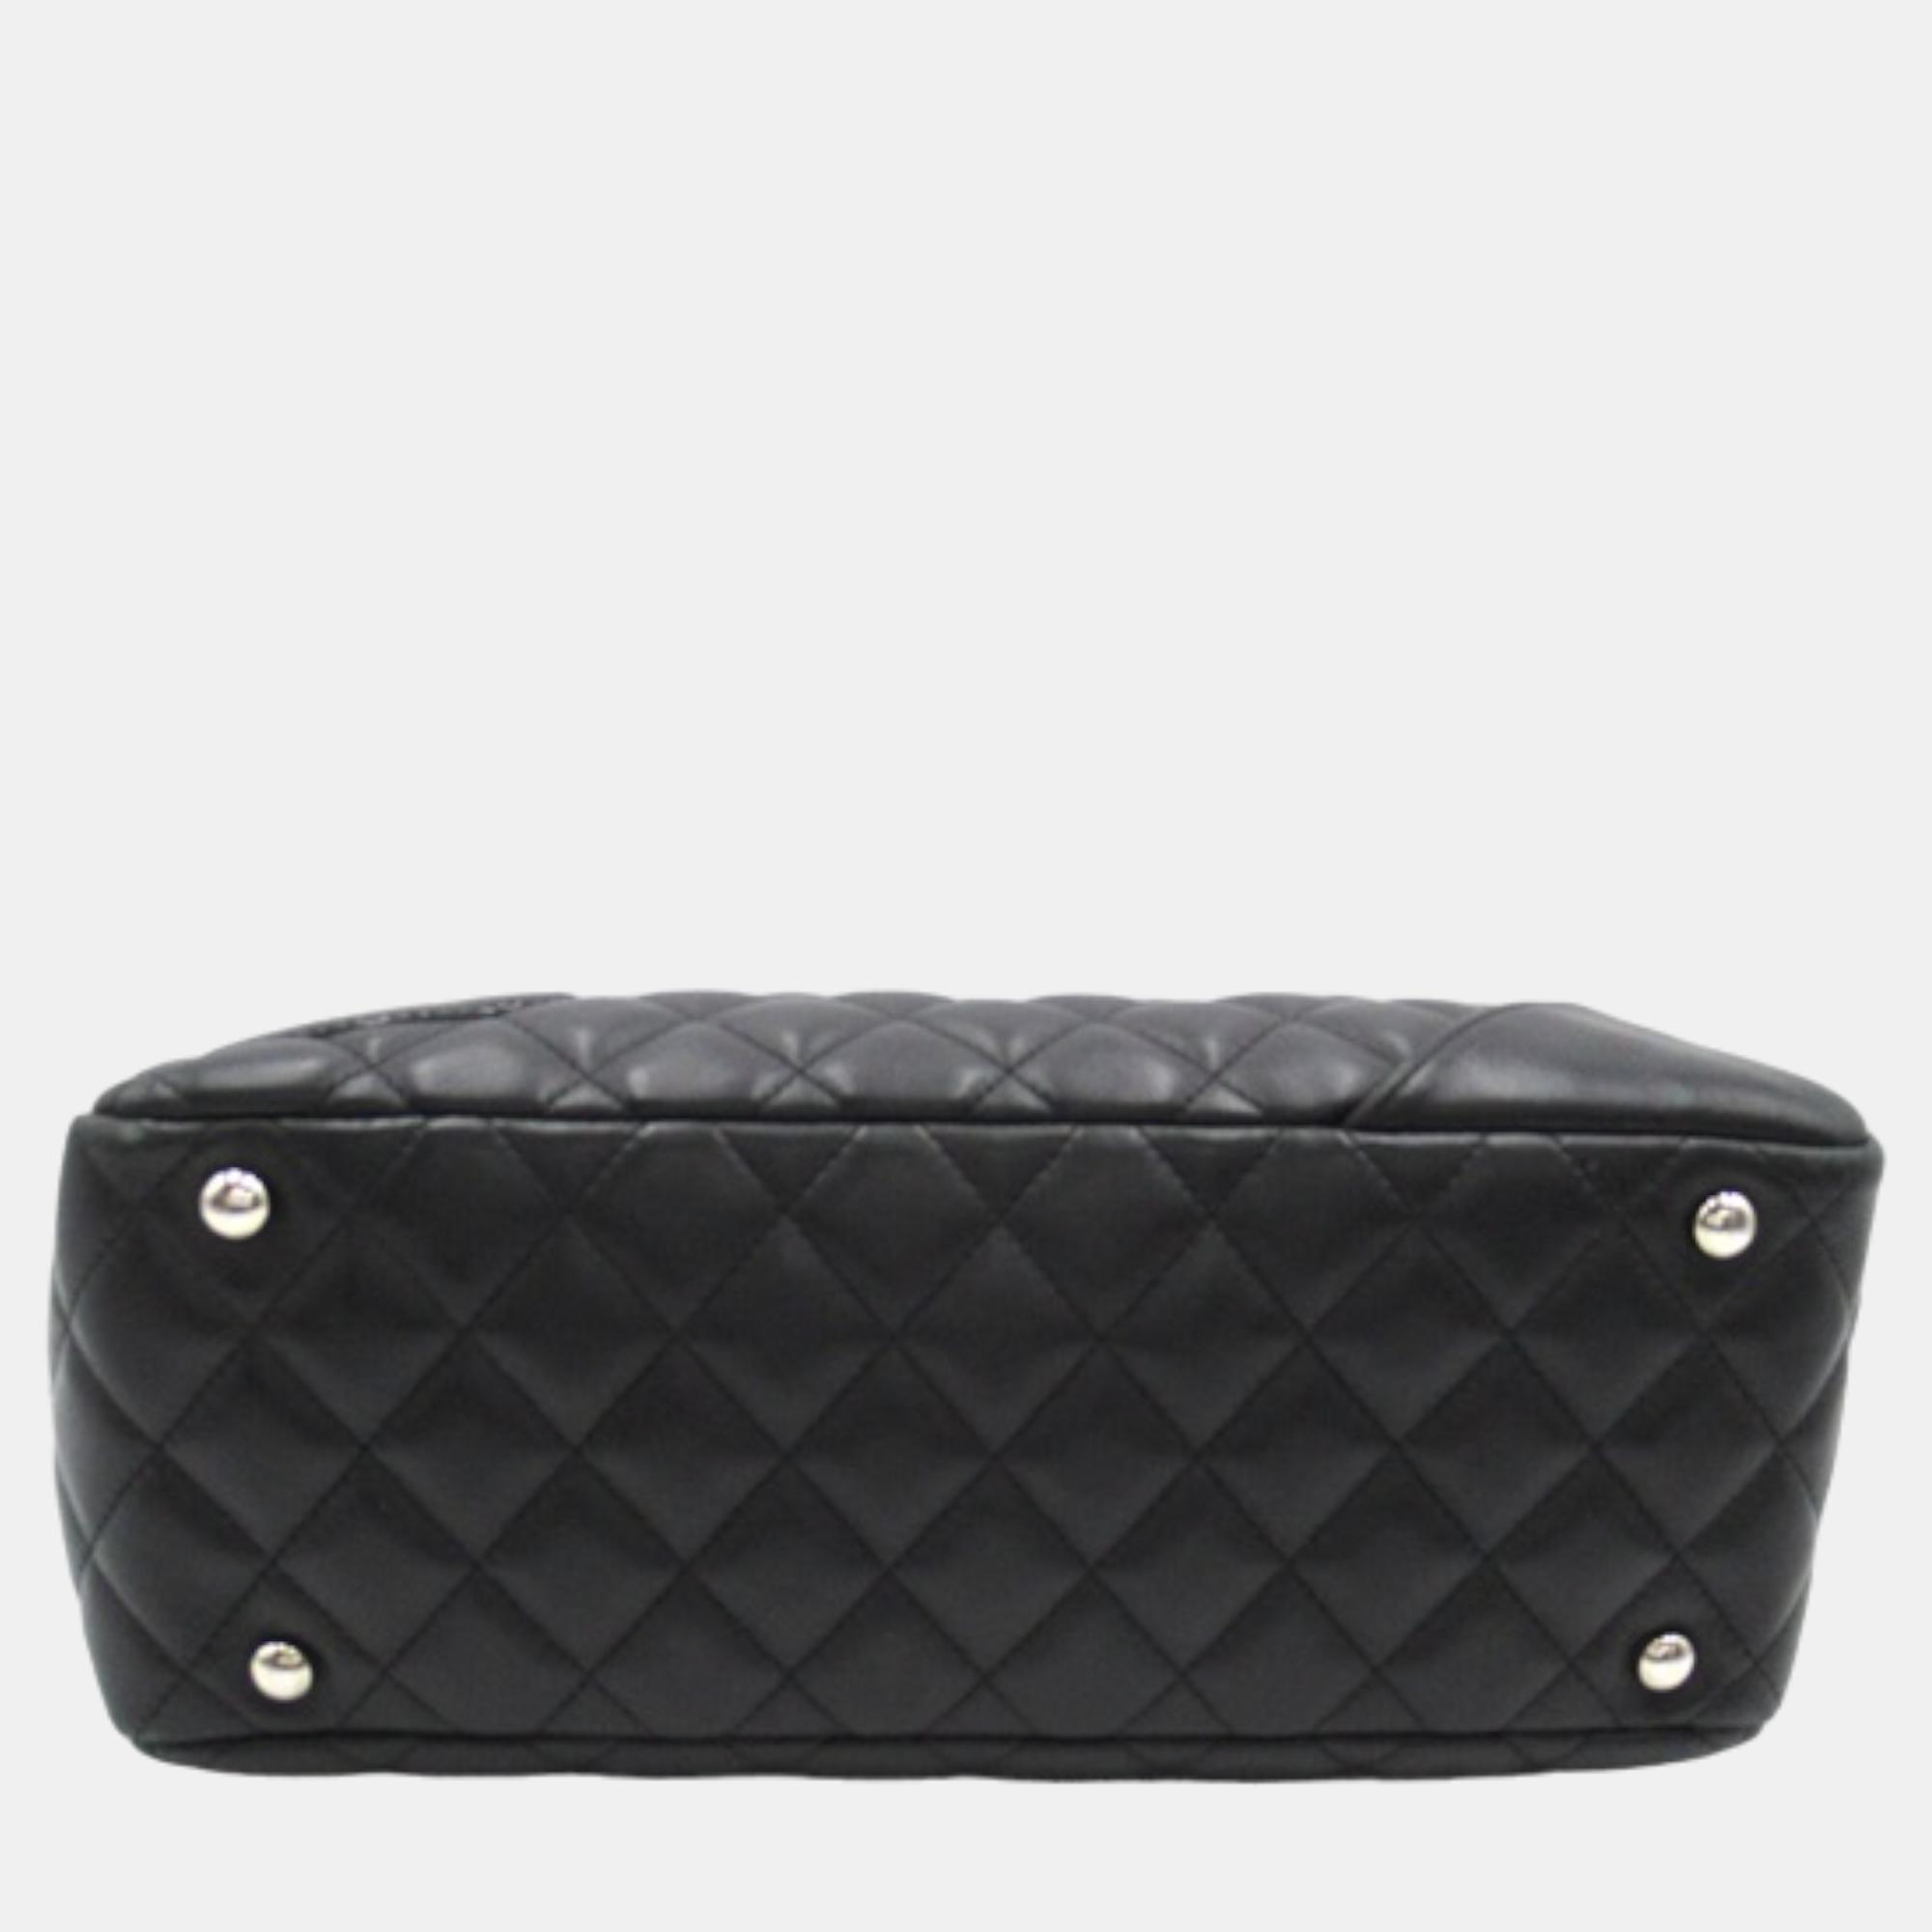 Chanel Black Cambon Quilted Leather Bowling Bag